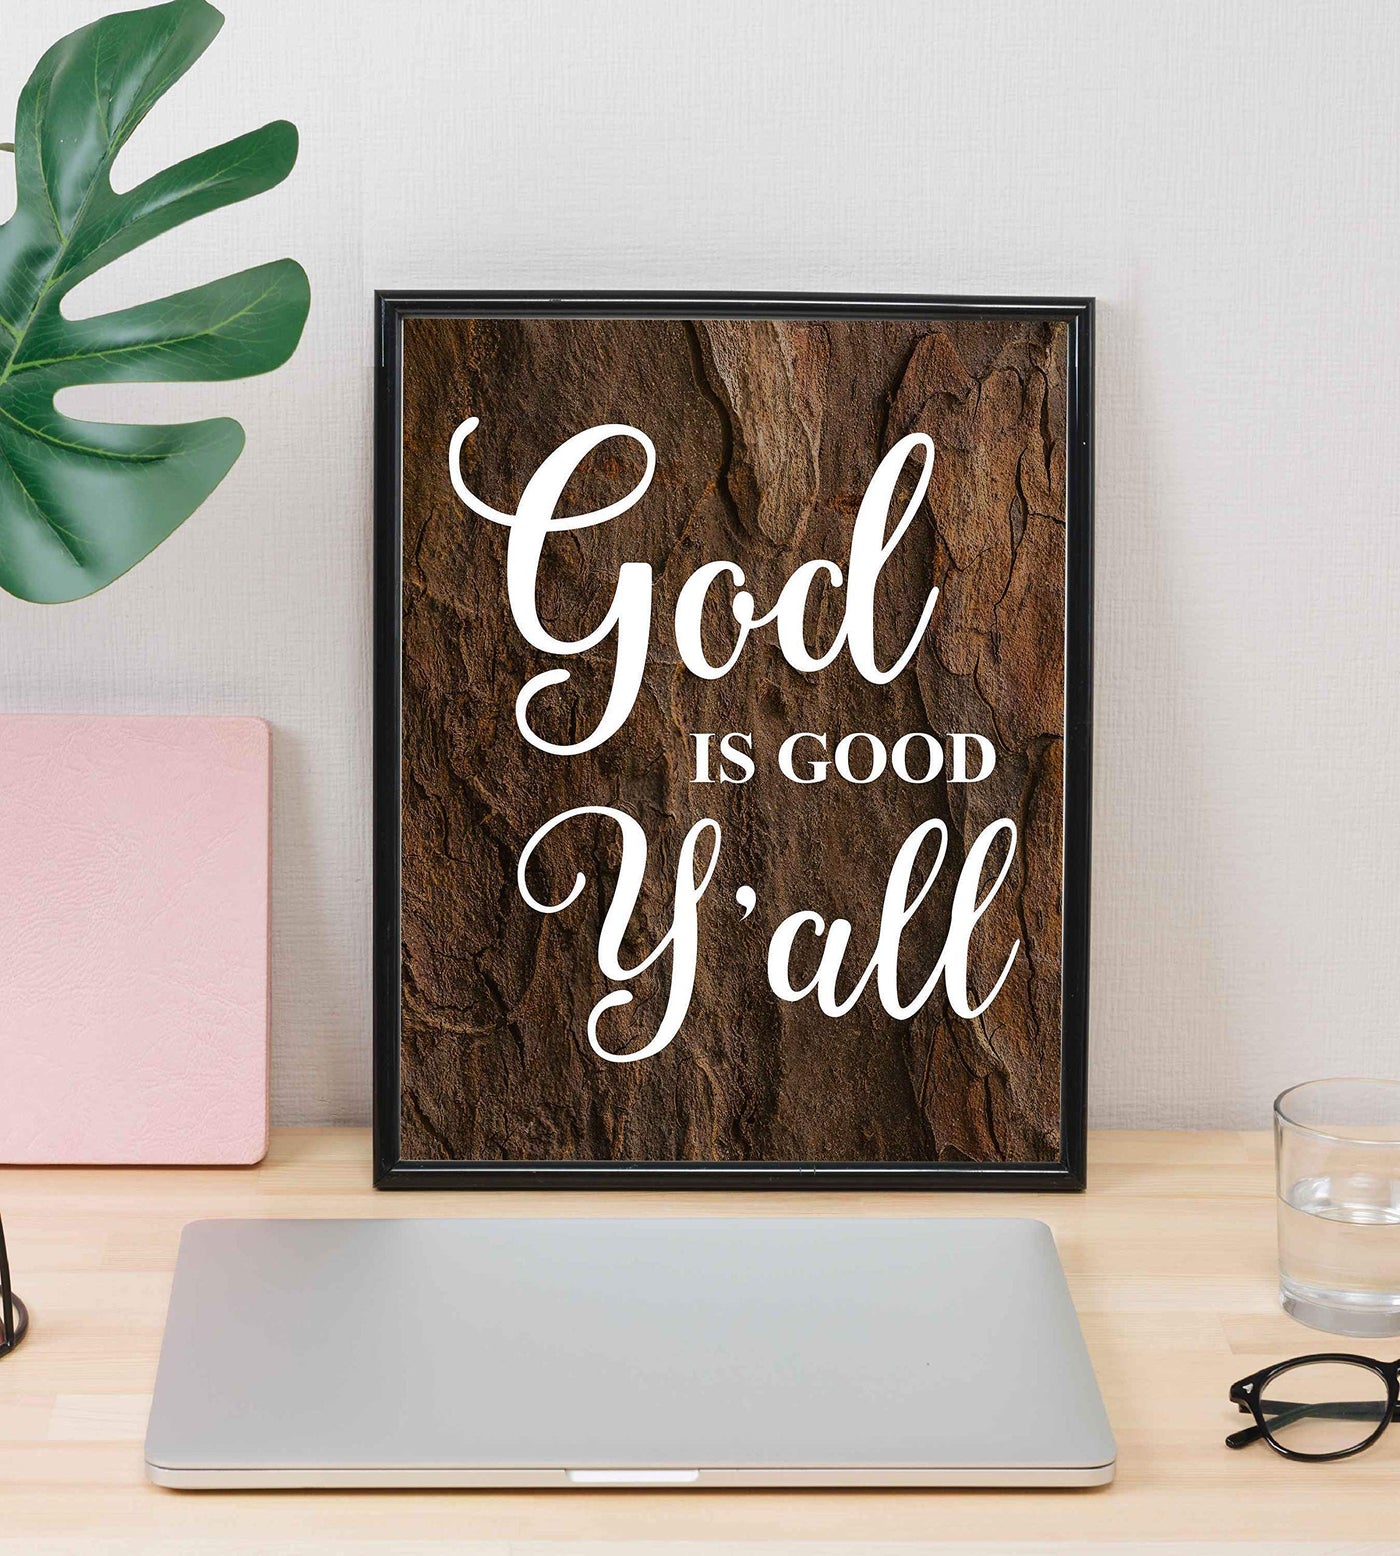 God Is Good Y'all Inspirational Quotes Wall Art -8 x 10" Rustic Christian Poster Print-Ready to Frame. Motivational Decor for Home-Office-Farmhouse-Church. Great Sign for Faith and Inspiration!